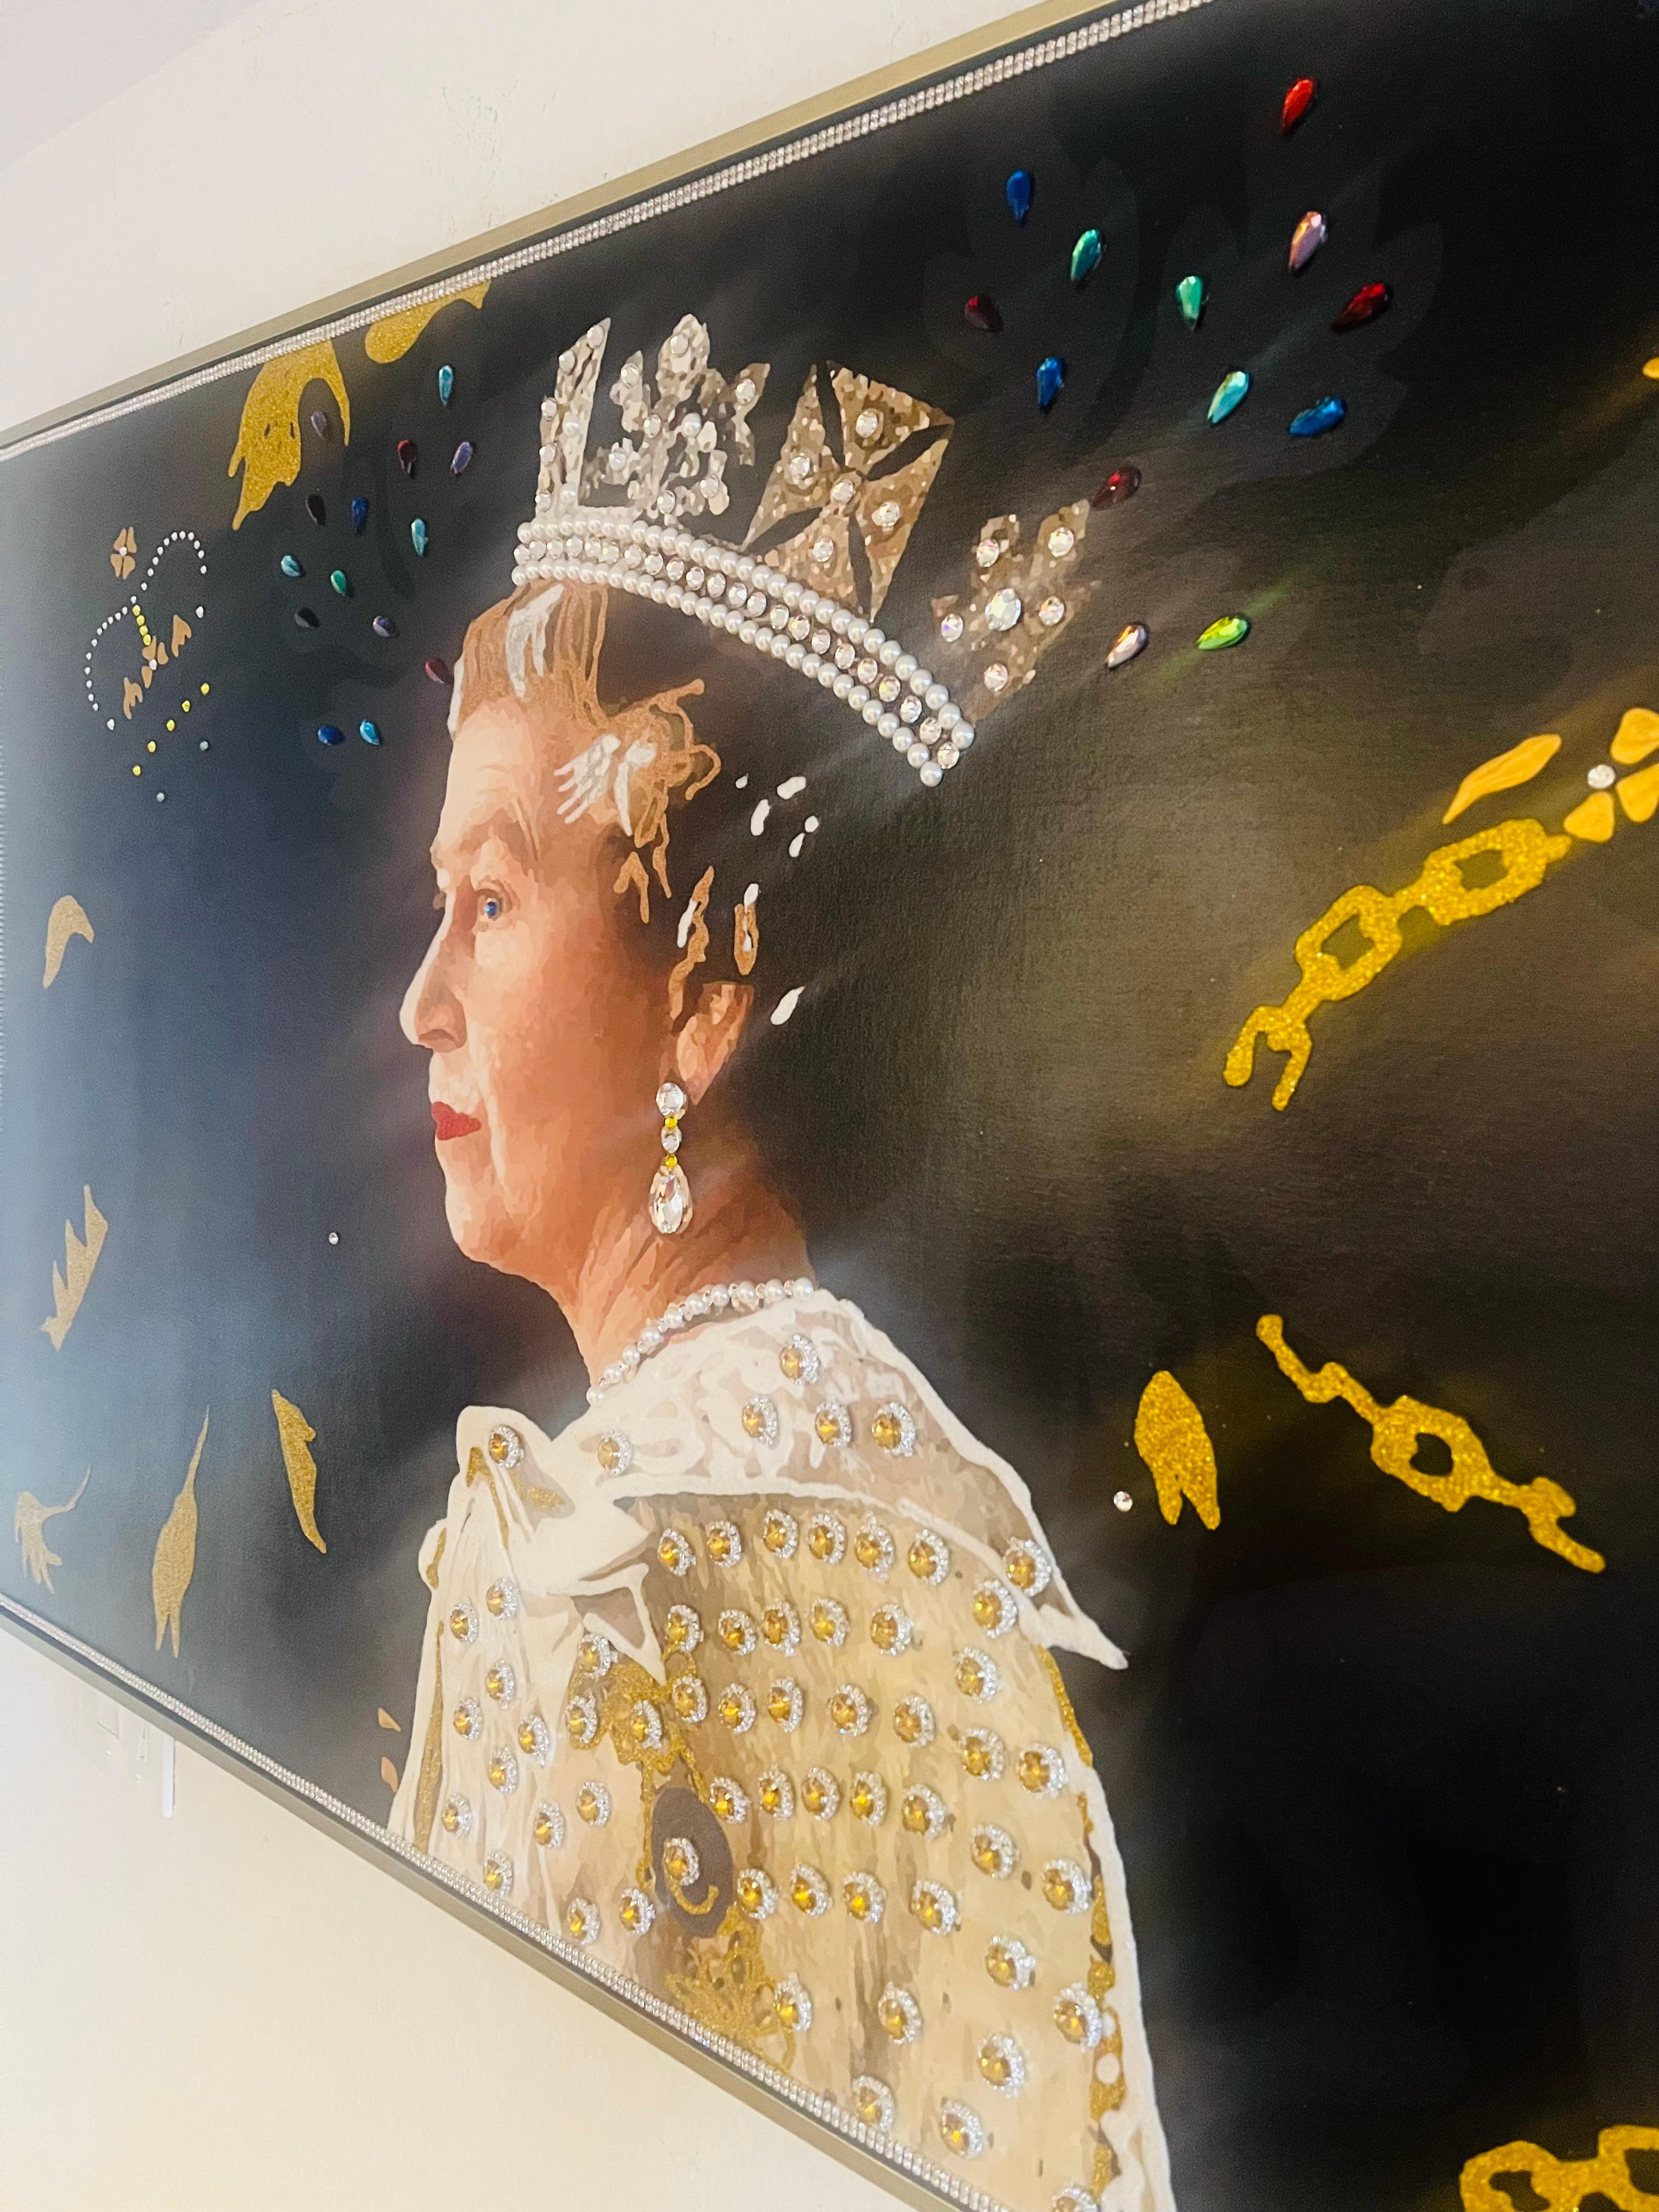                  **ANNUAL SUPER SALE TIL MAY 15th ONLY**
*This Price Won't Be Repeated Again This Year - Take Advantage Of It*

Her Majestic Queen Elizabeth is the THIRD and final homage of the artist to the greatest and most relevant queen of